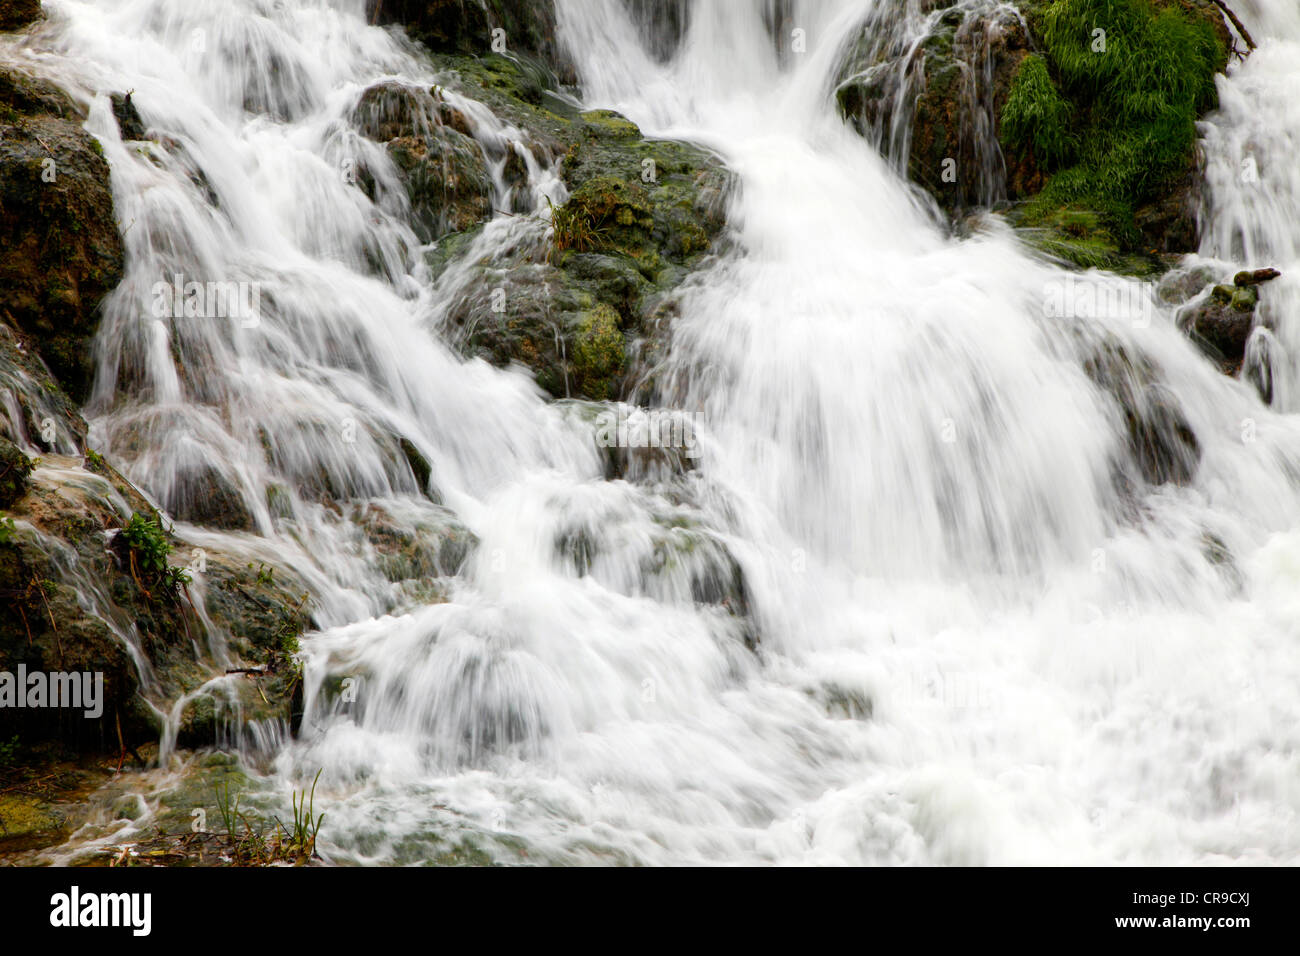 Waterfall, water flows down, over rocks. Little creek, river. Stock Photo